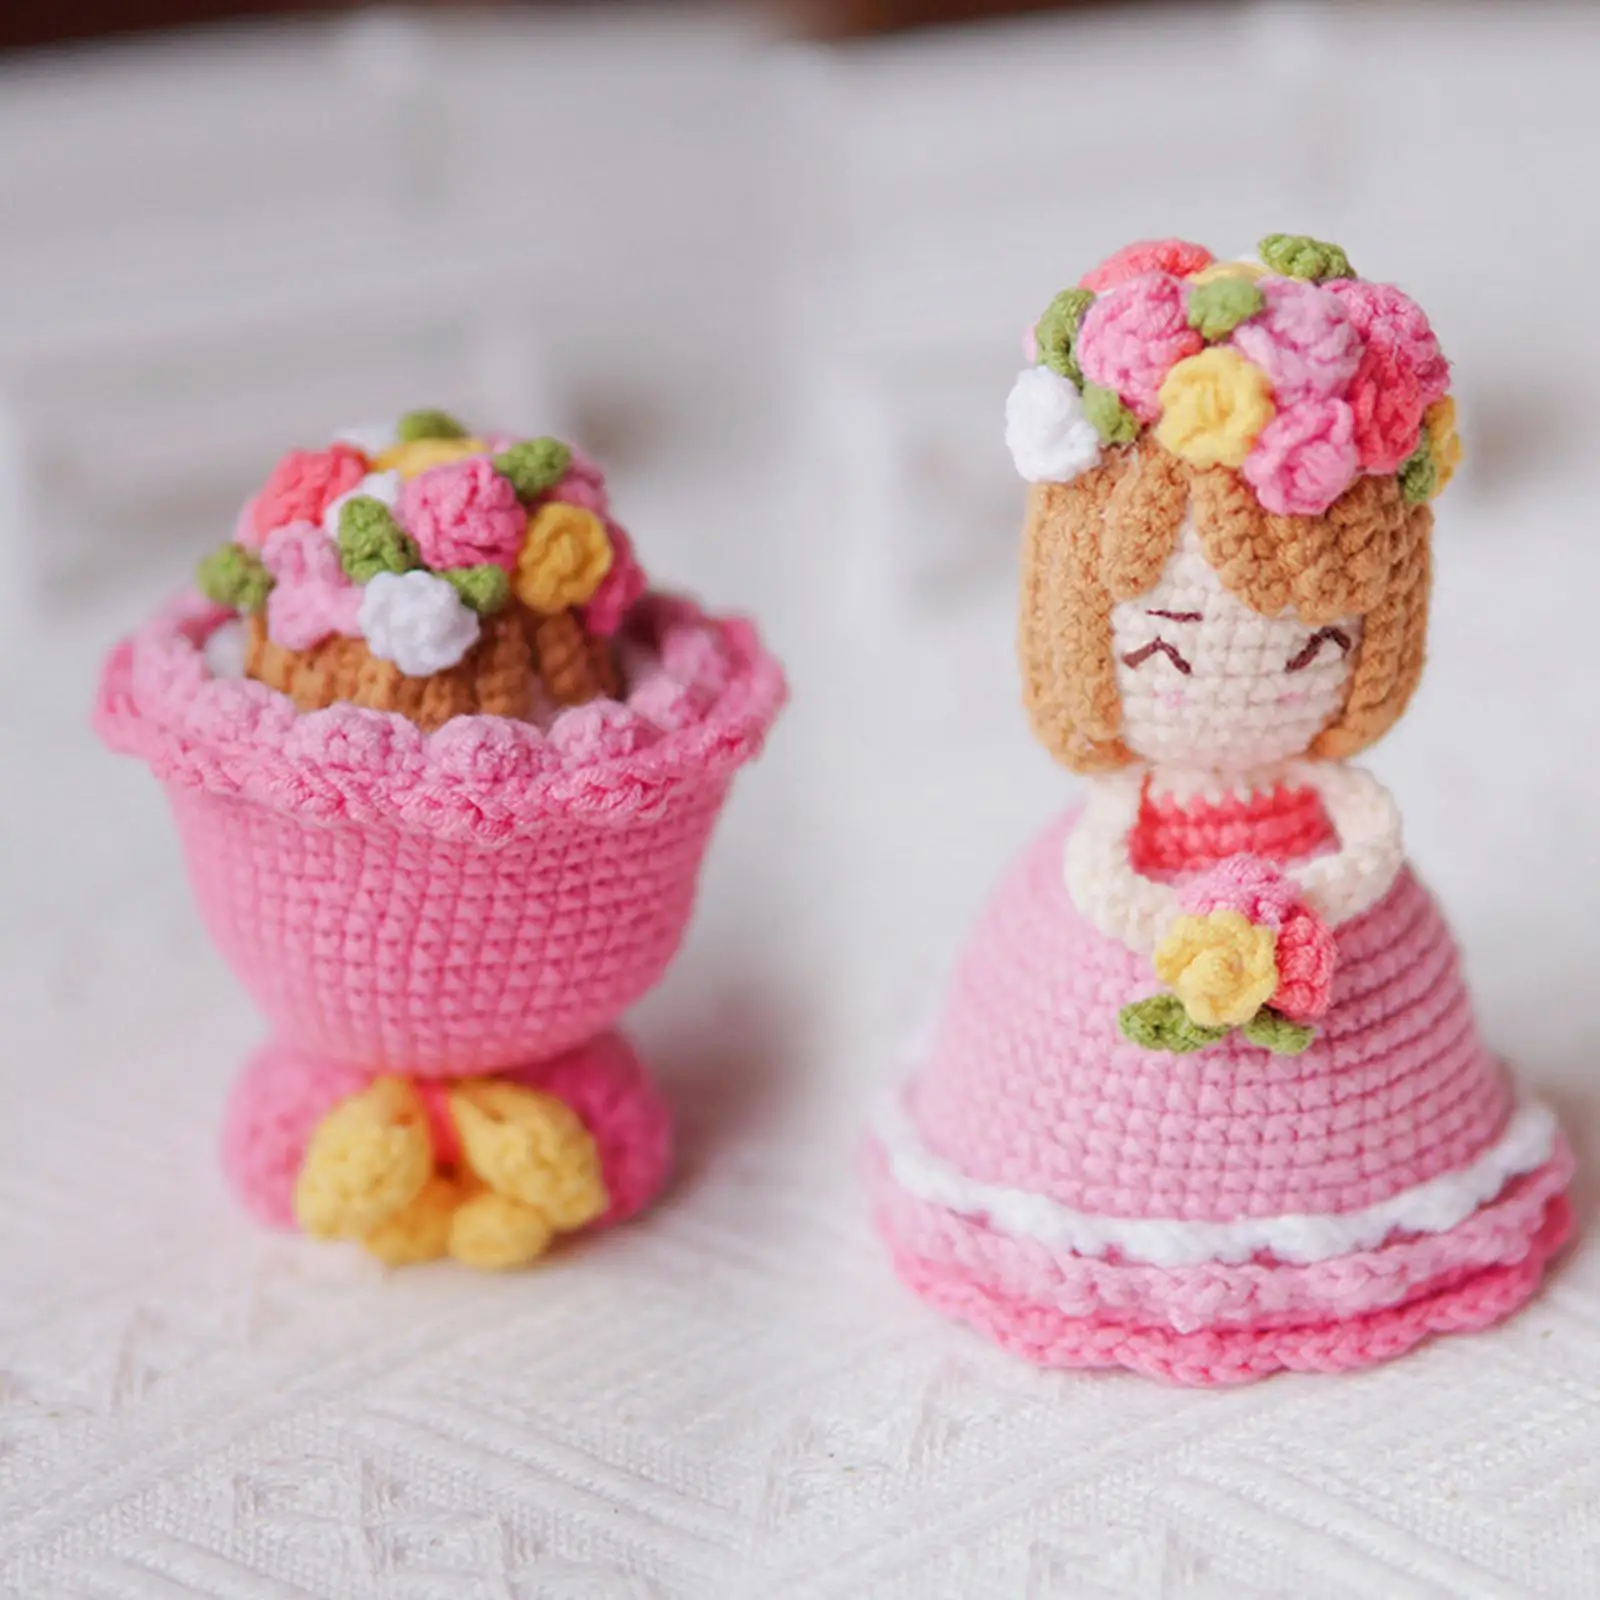 Lovely Soft Knit Toy Table Centerpieces Crochet Stuffed Bride Doll Knitted Crochet Bouquet for Women Girlfriend Birthday Gifts